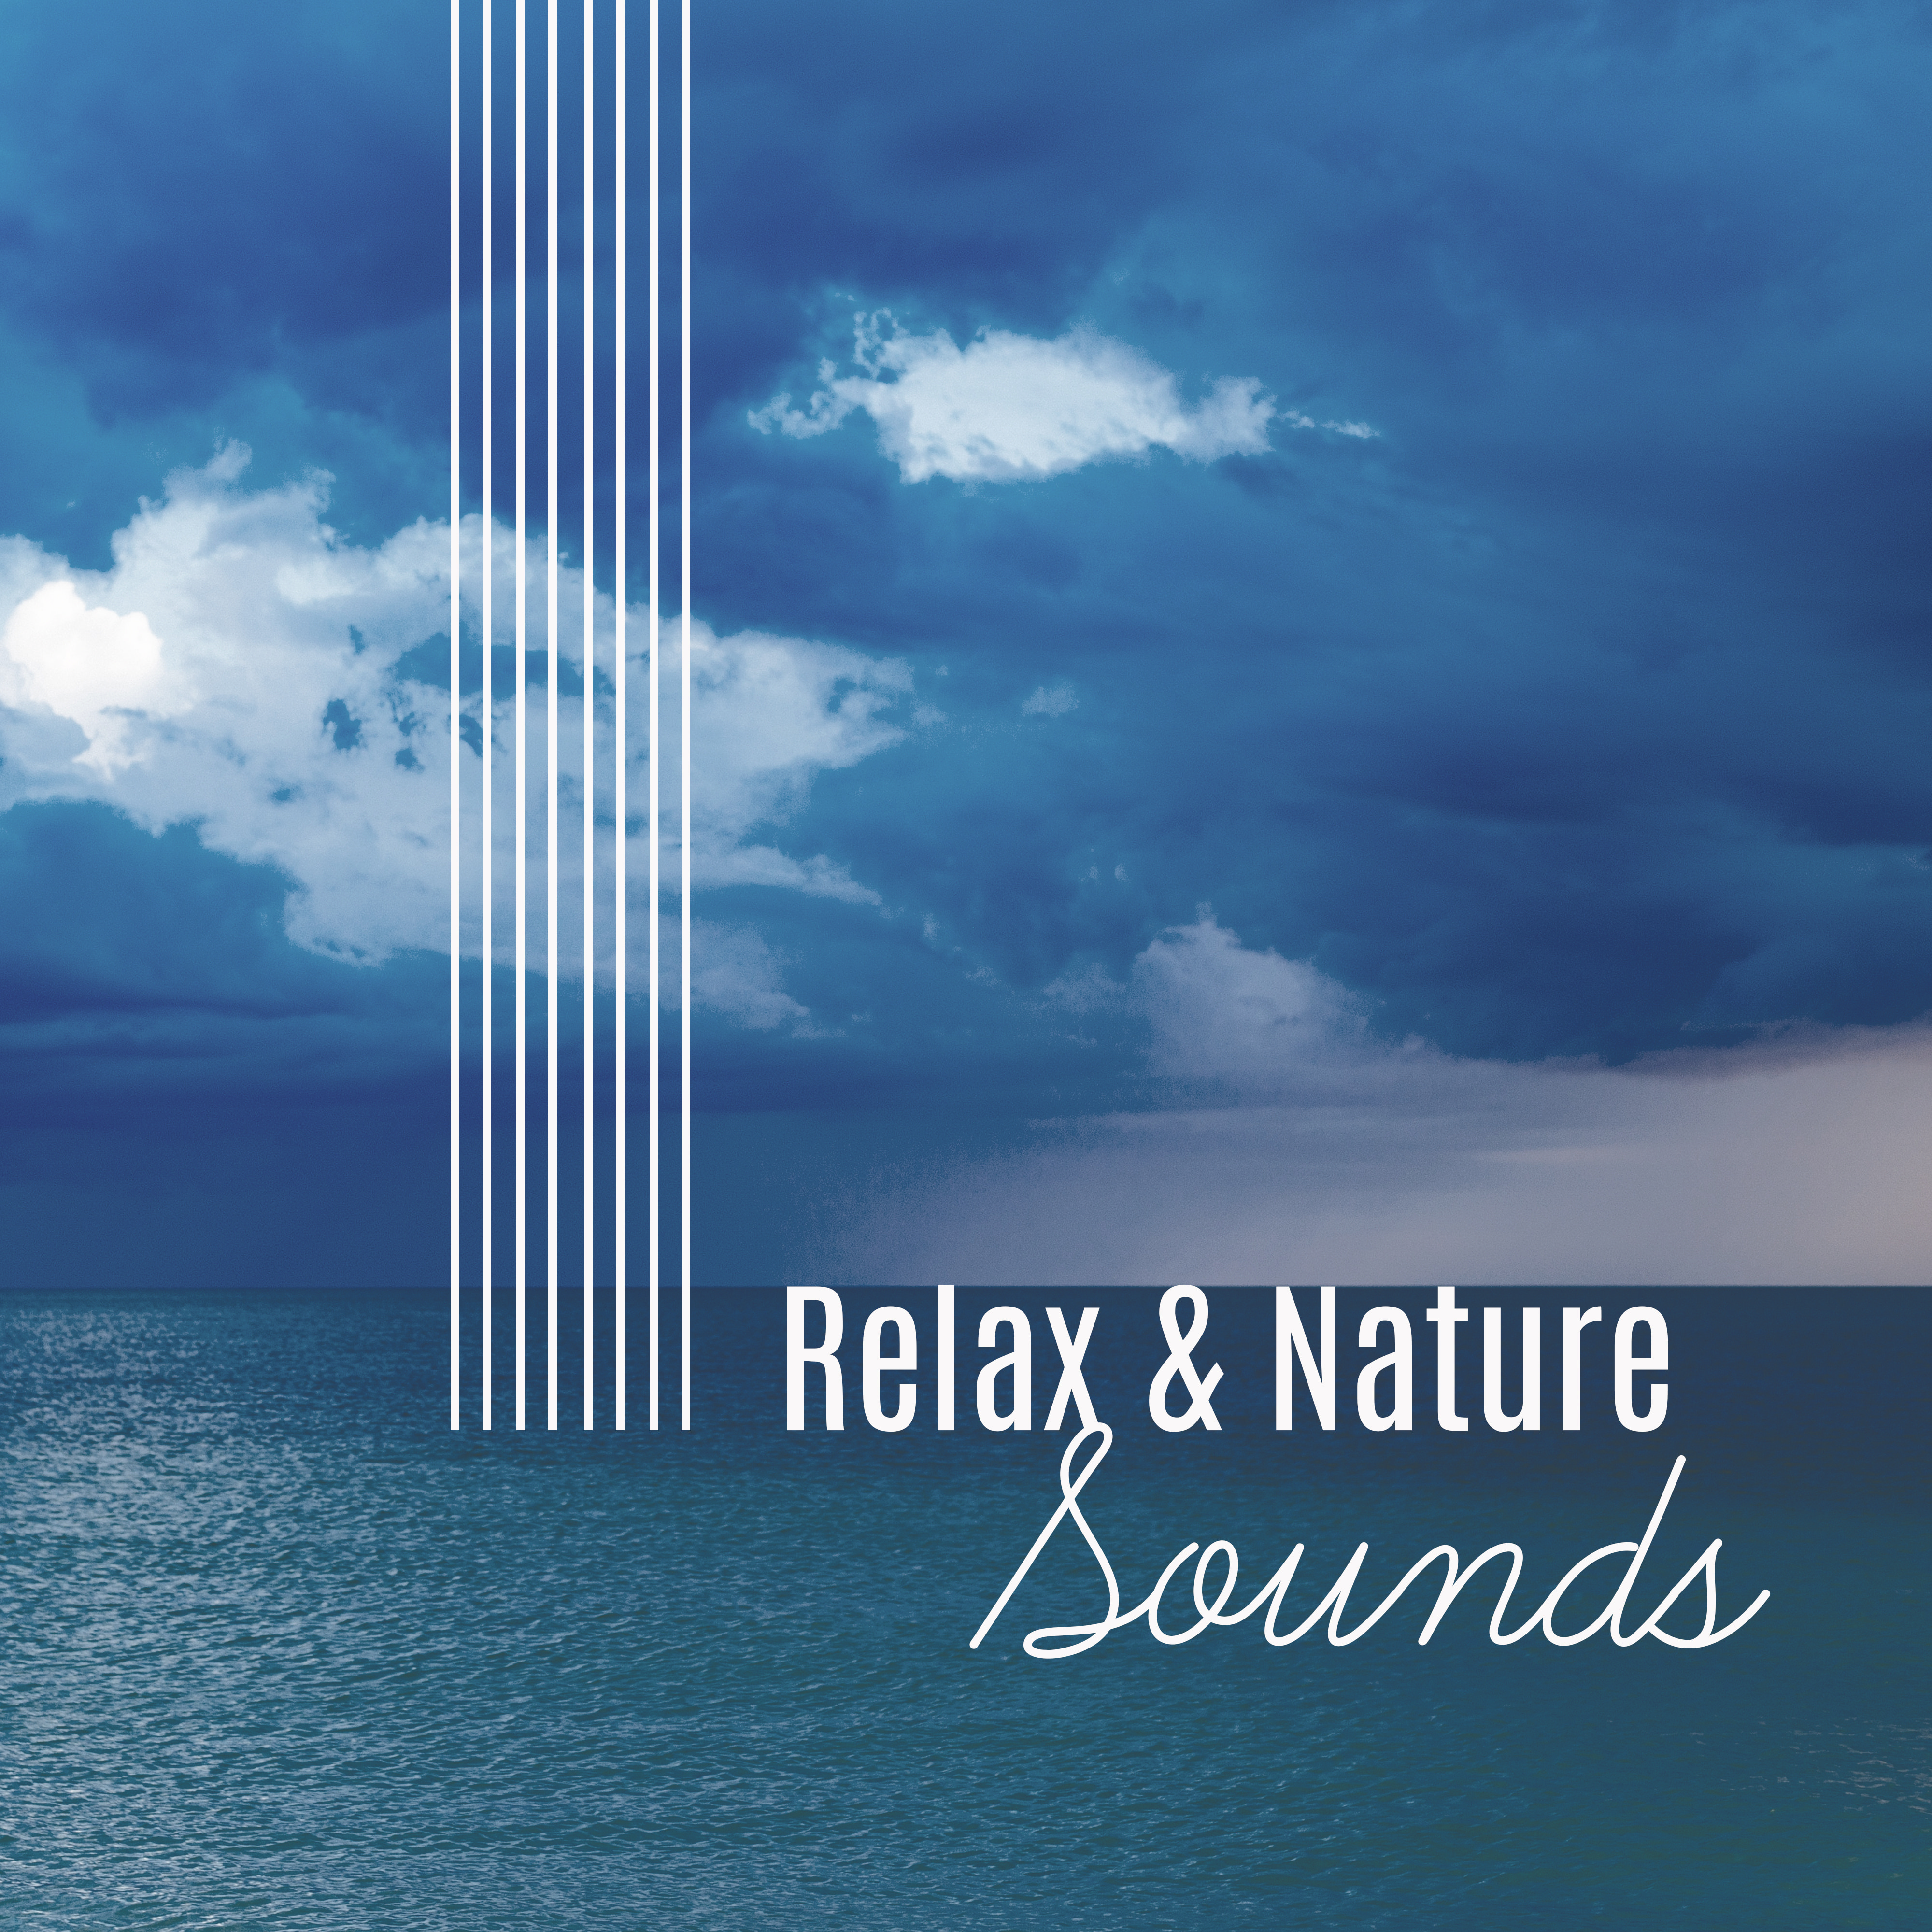 Relax & Nature Sounds – Peaceful Music for Relaxation, Sounds of Sea, Forest Music, Soothing Water, Deep Sleep, Meditation, Gentle Melodies